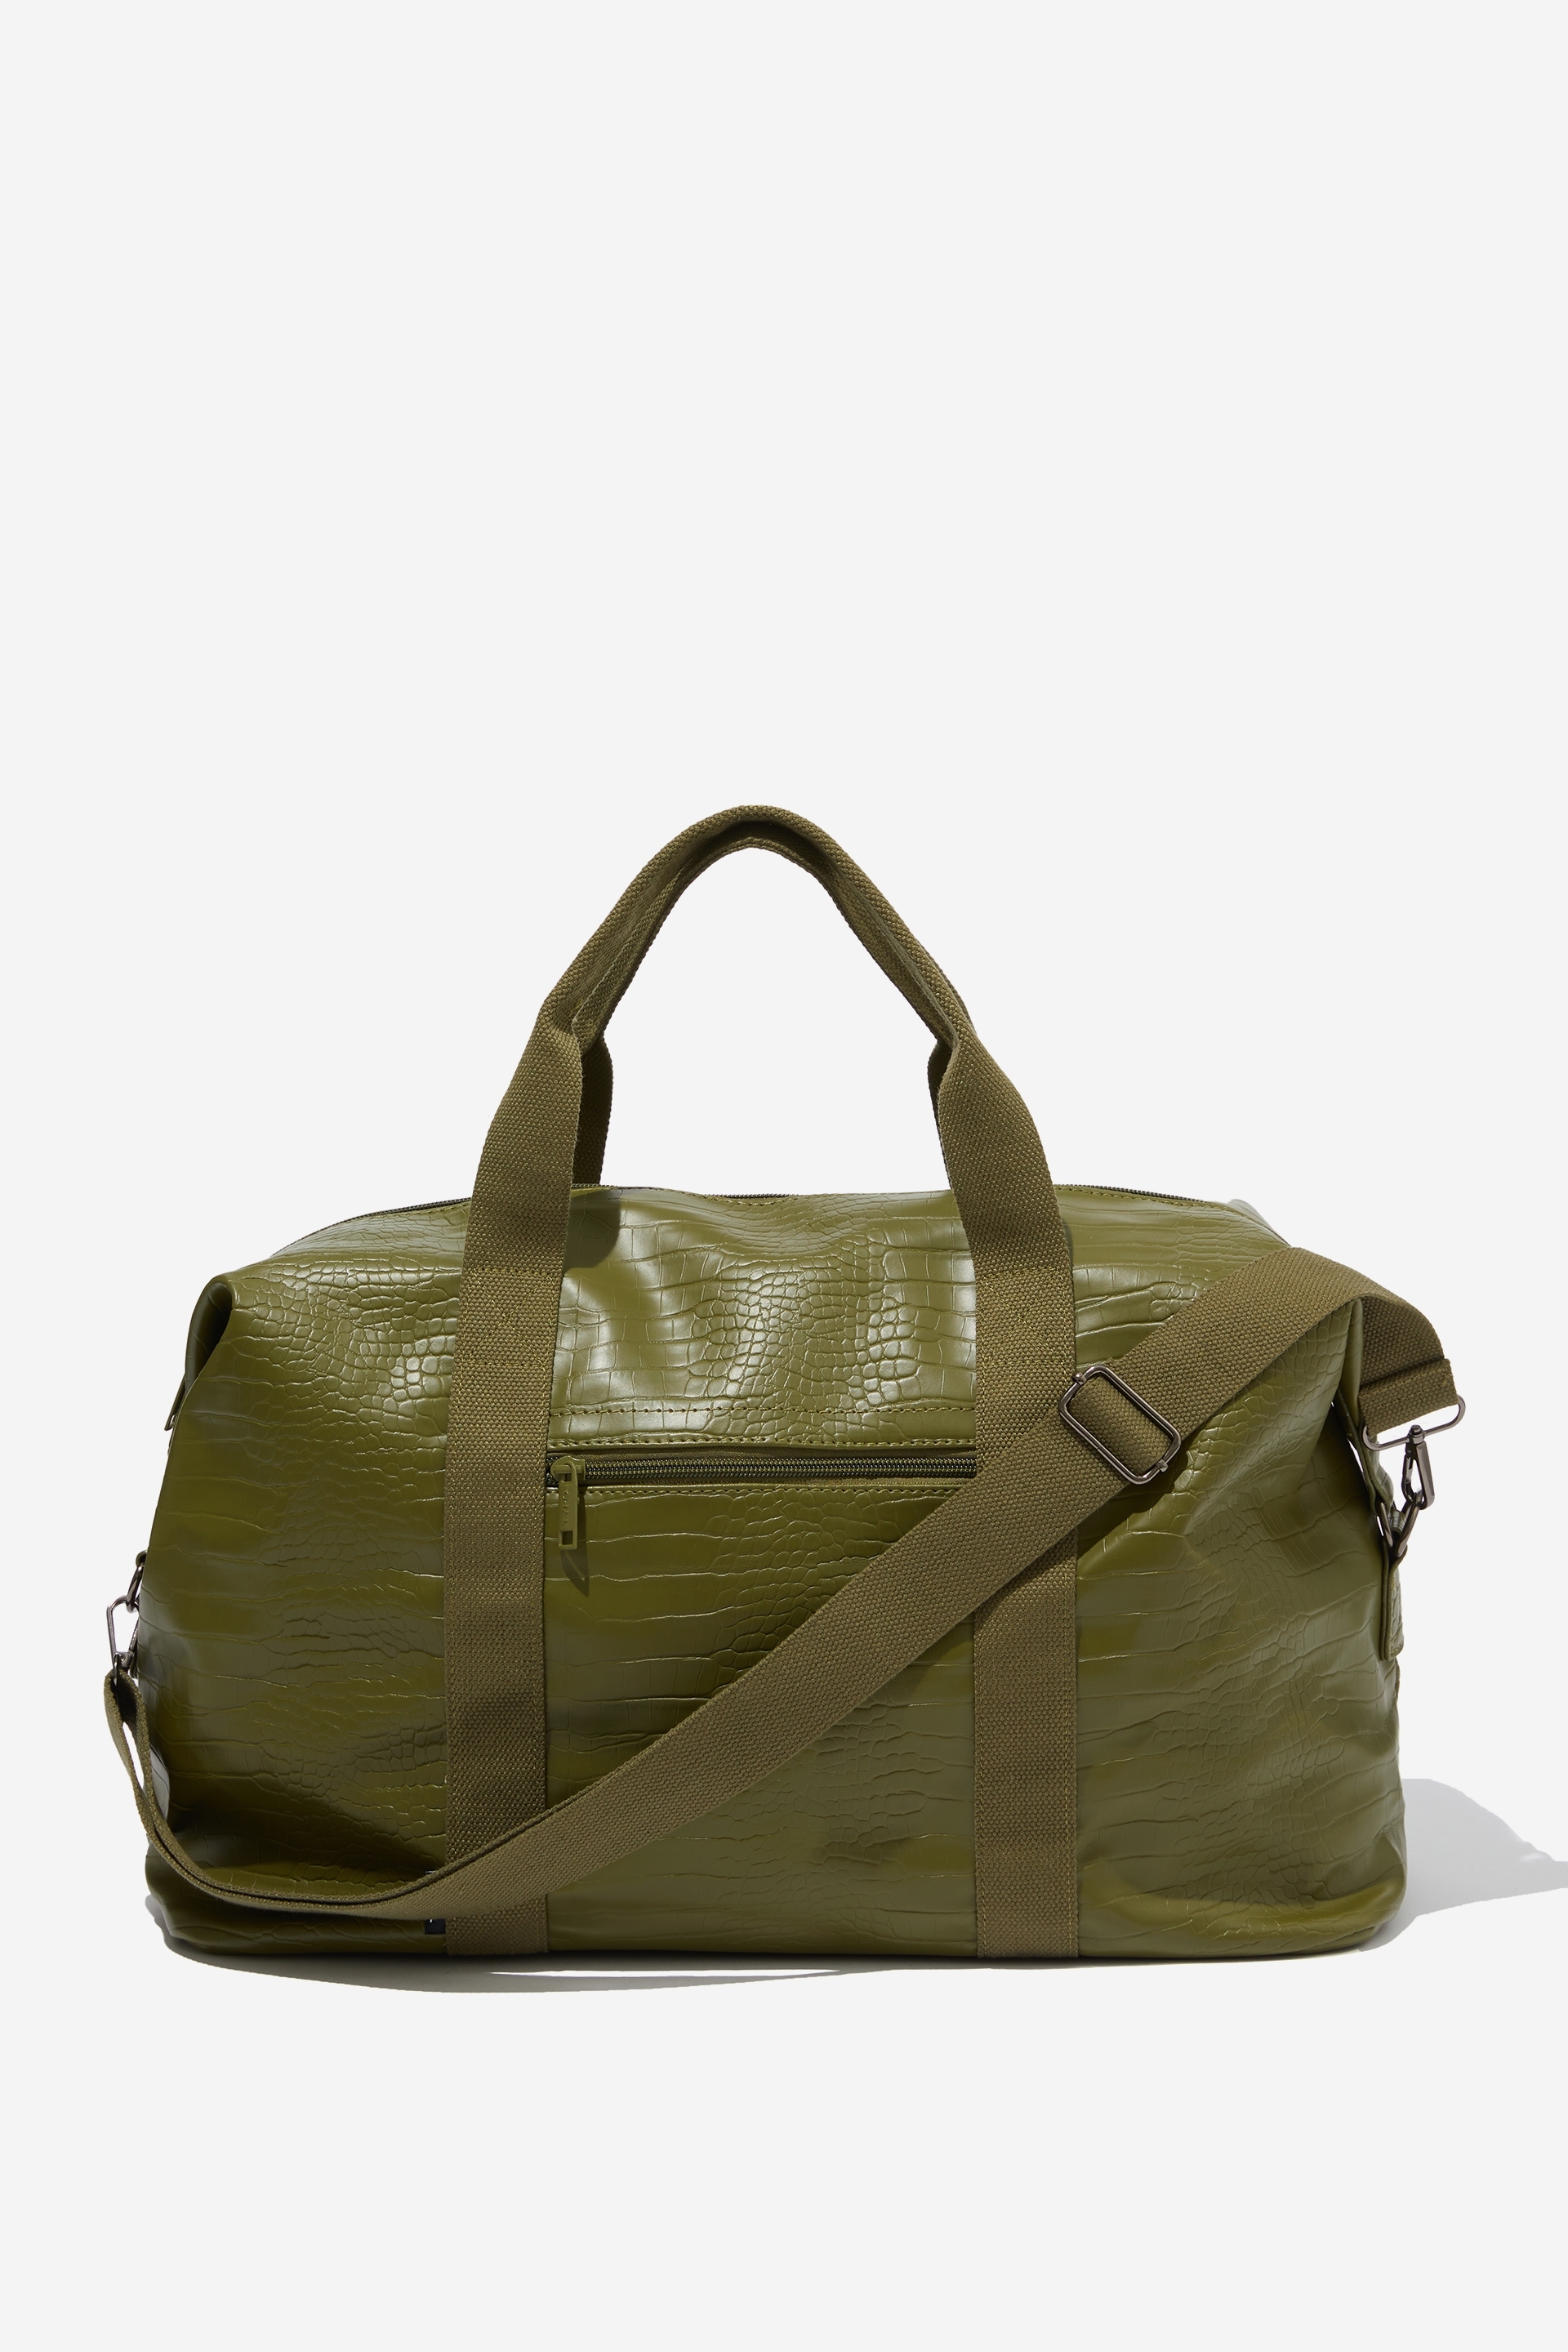 Typo - Off The Grid Hold All Duffle Bag - Olive textured